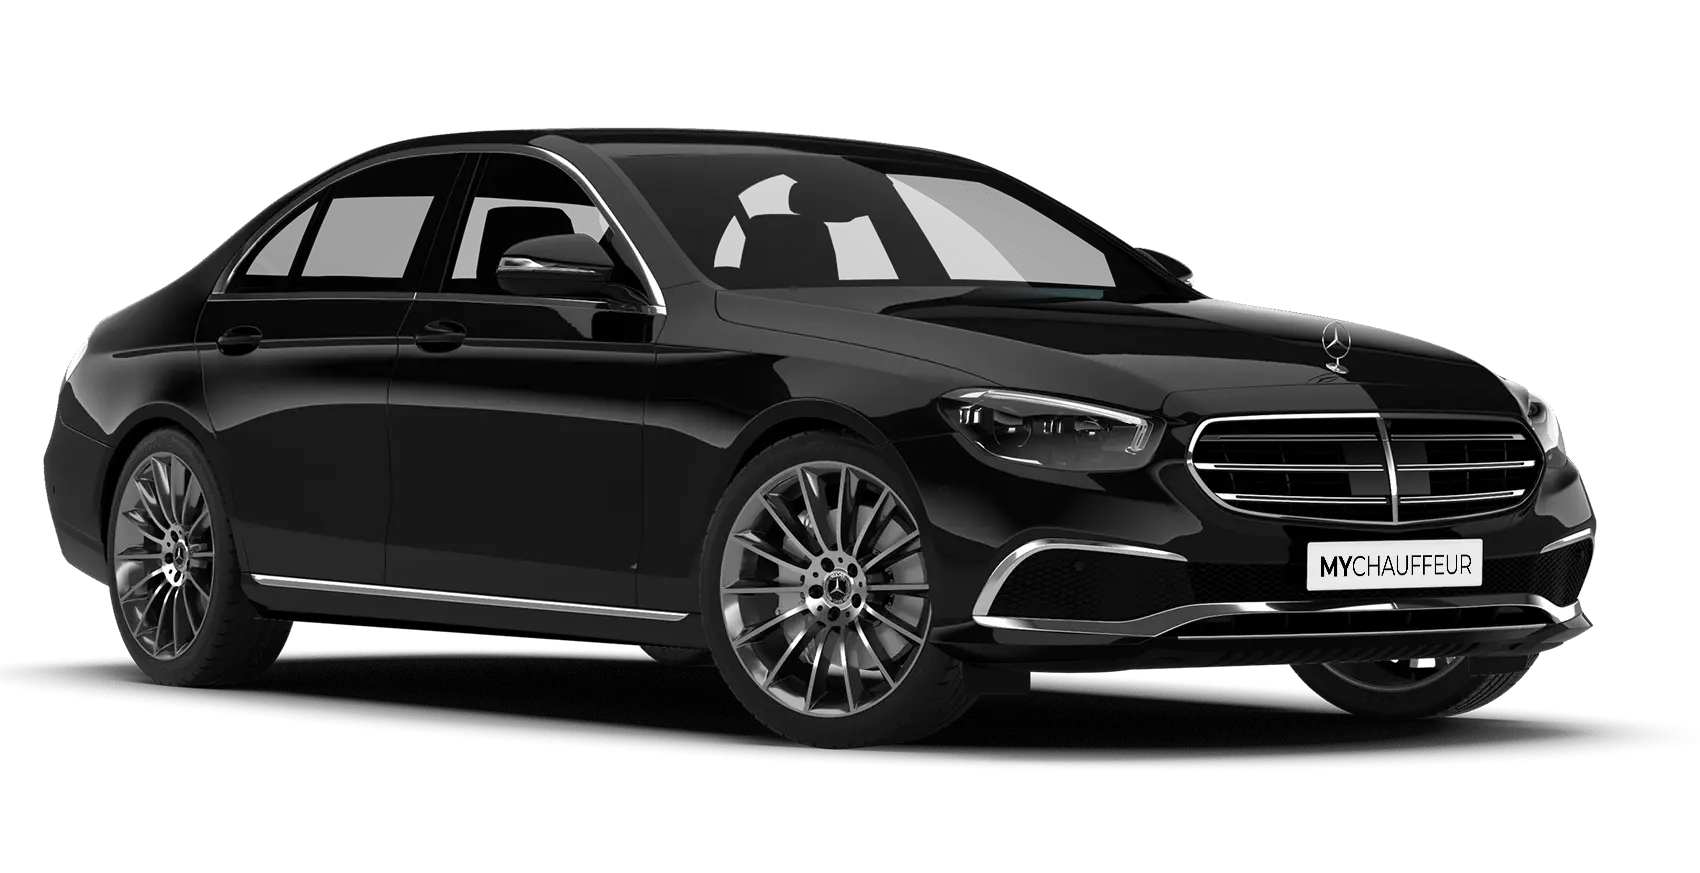 'Business Class Hire by MyChauffeur', 'Business Class Hire near me', 'Business Class Hire in Berlin', 'Business Class Hire in Germany', 'Business Class Hire in Turkey', 'Business Class Hire in France', 'Business Class Hire in UAE'